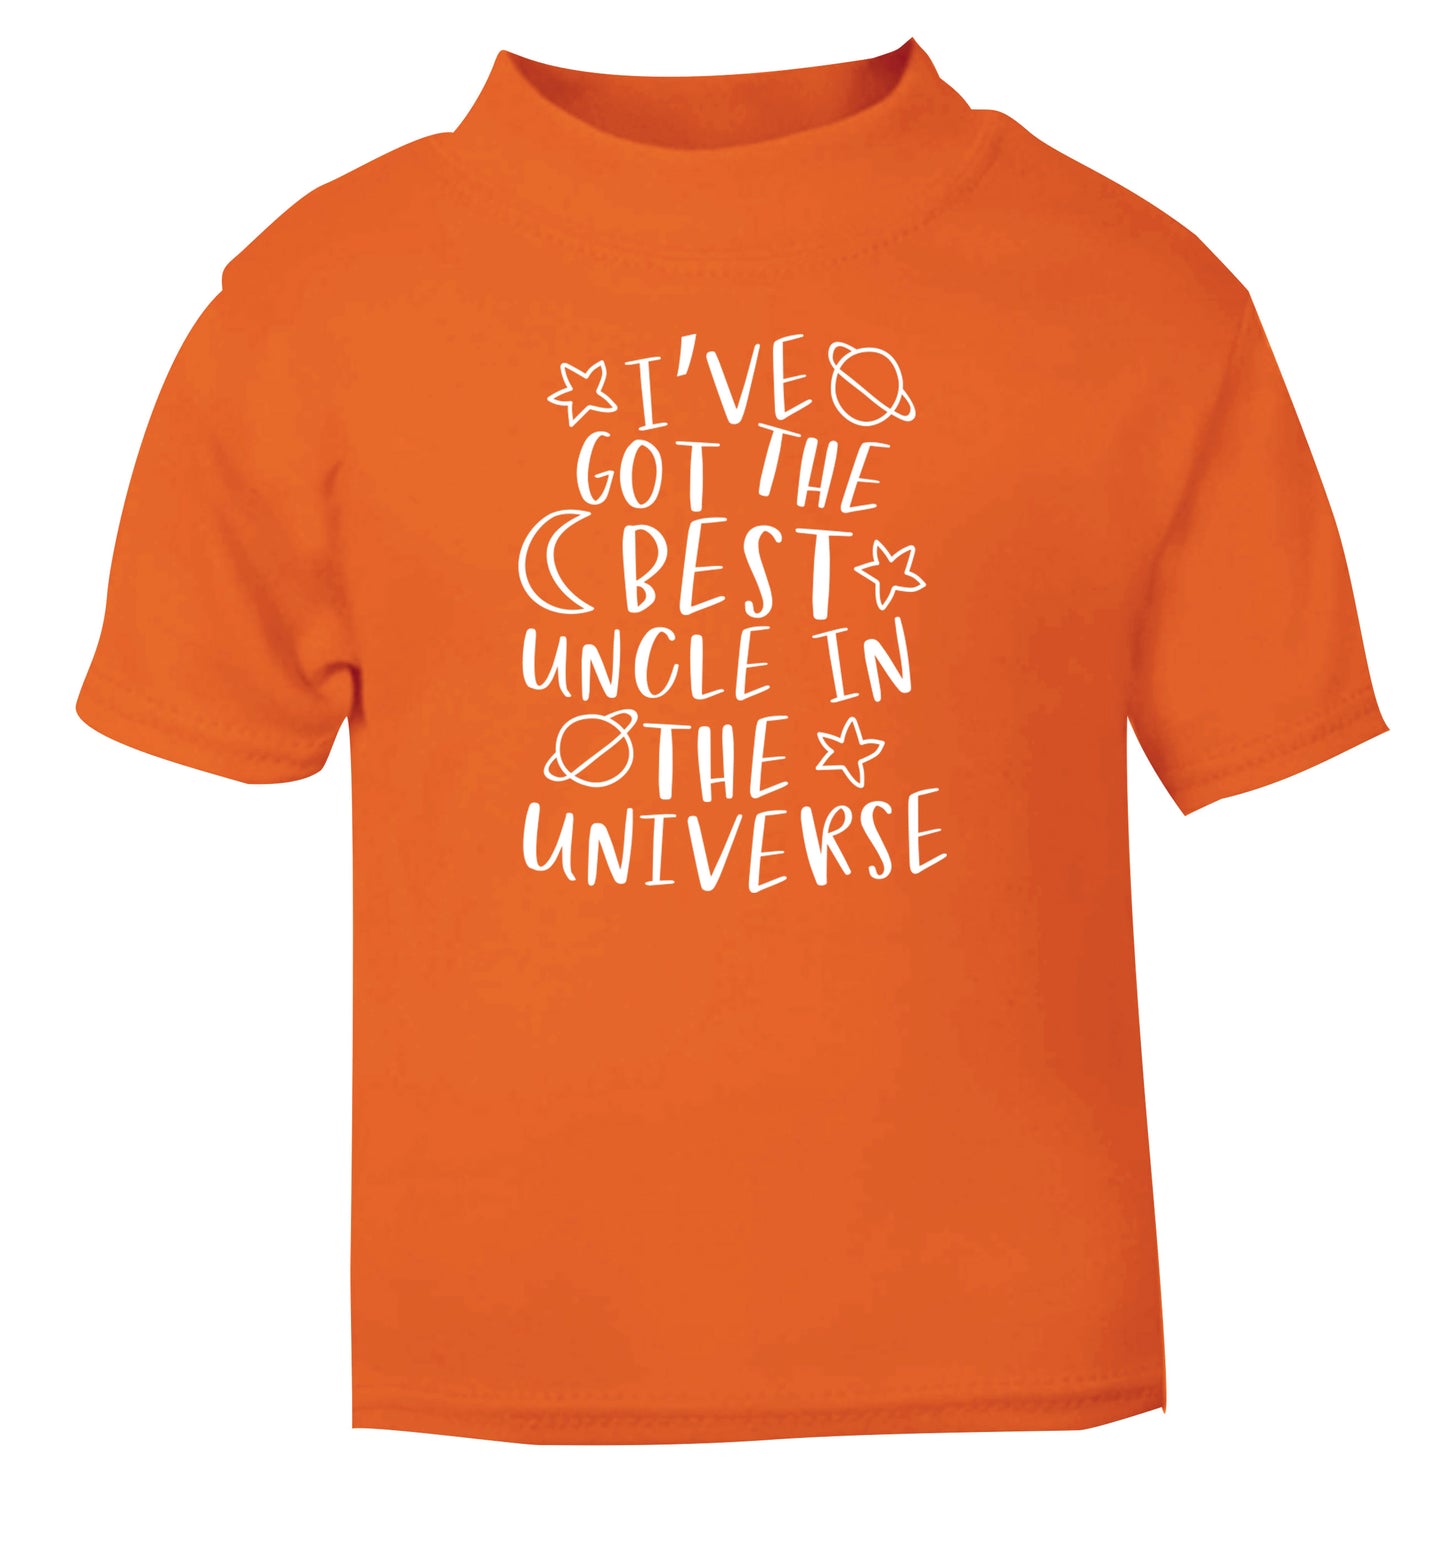 I've got the best uncle in the universe orange Baby Toddler Tshirt 2 Years